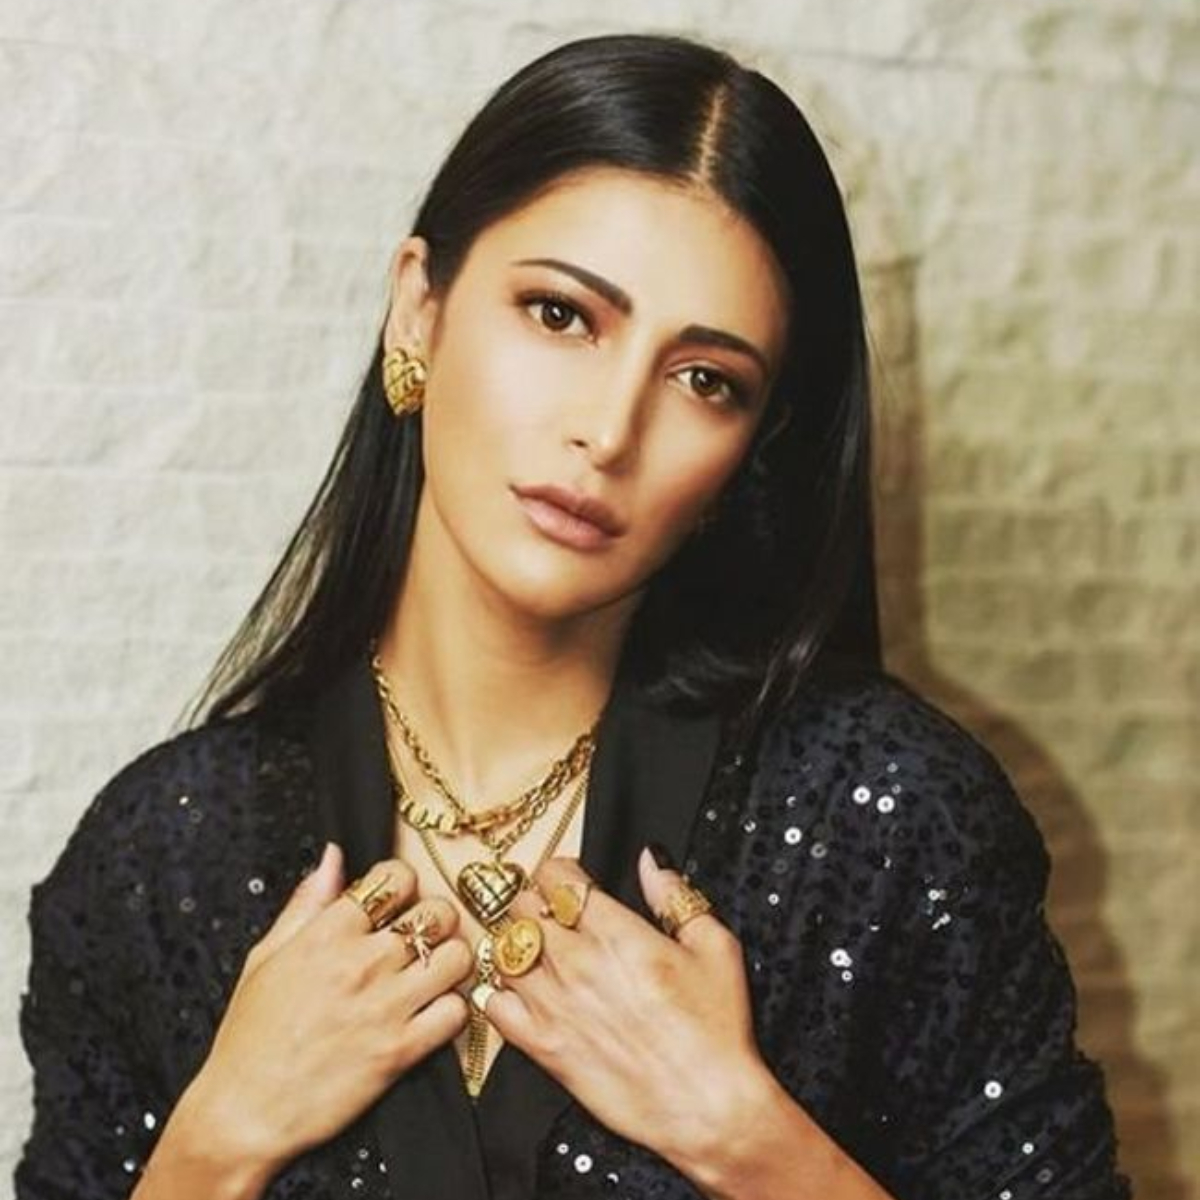 EXCLUSIVE: Snail serum is the WEIRDEST thing I applied on my face: Shruti Haasan on her beauty secrets & more